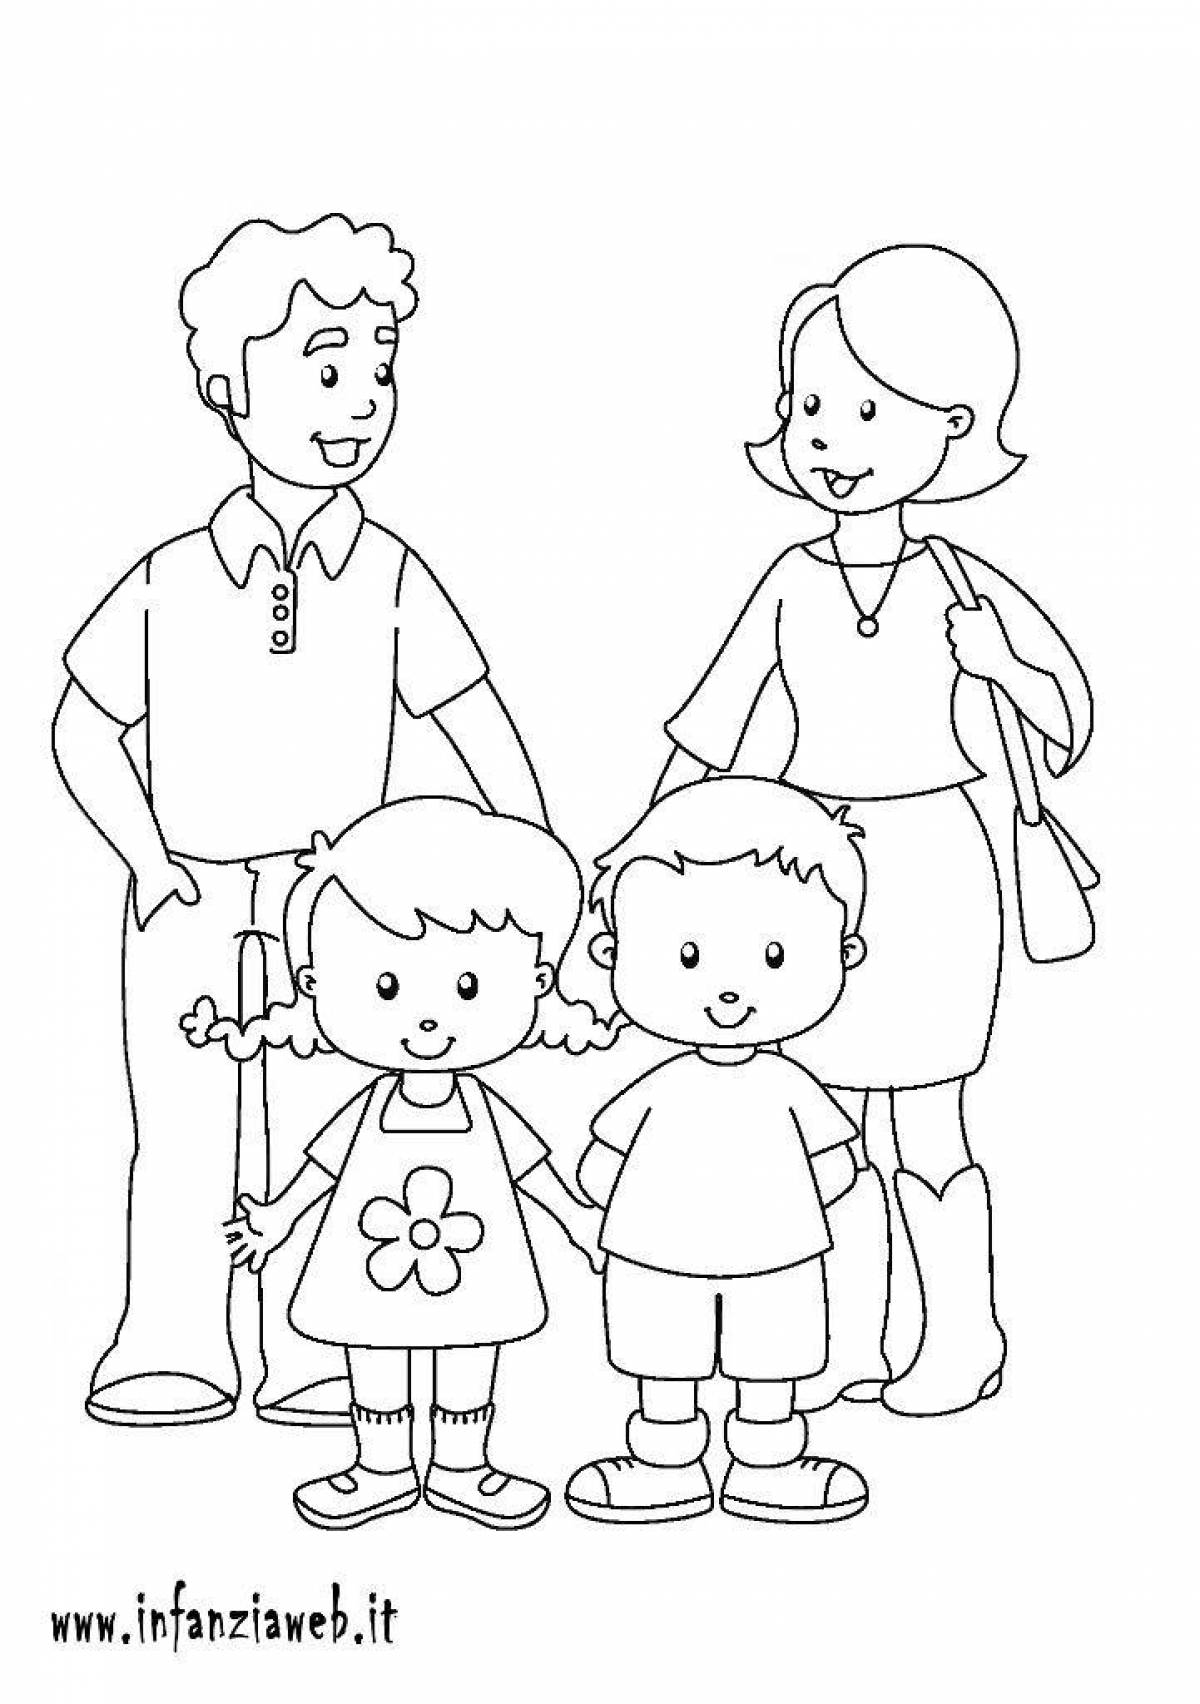 Animated drawing of my family